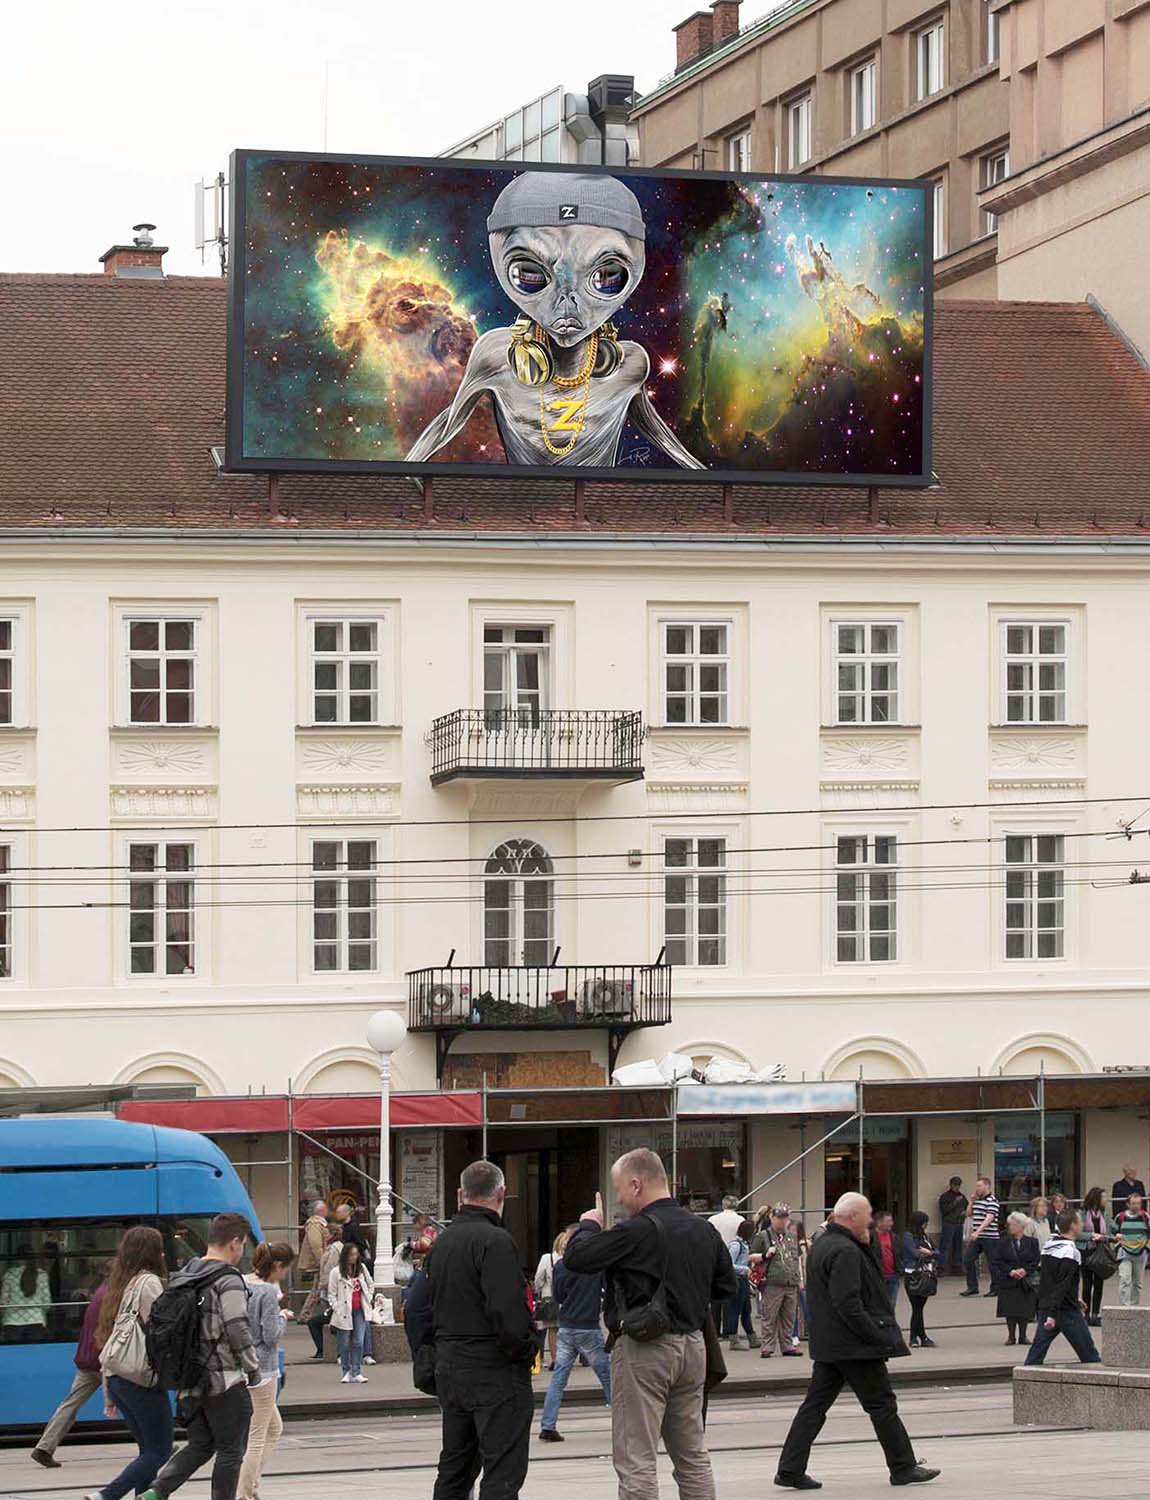 DJ Zedd the alien mix master mixed media by Doug LaRue on a large sign on a roof in Europe